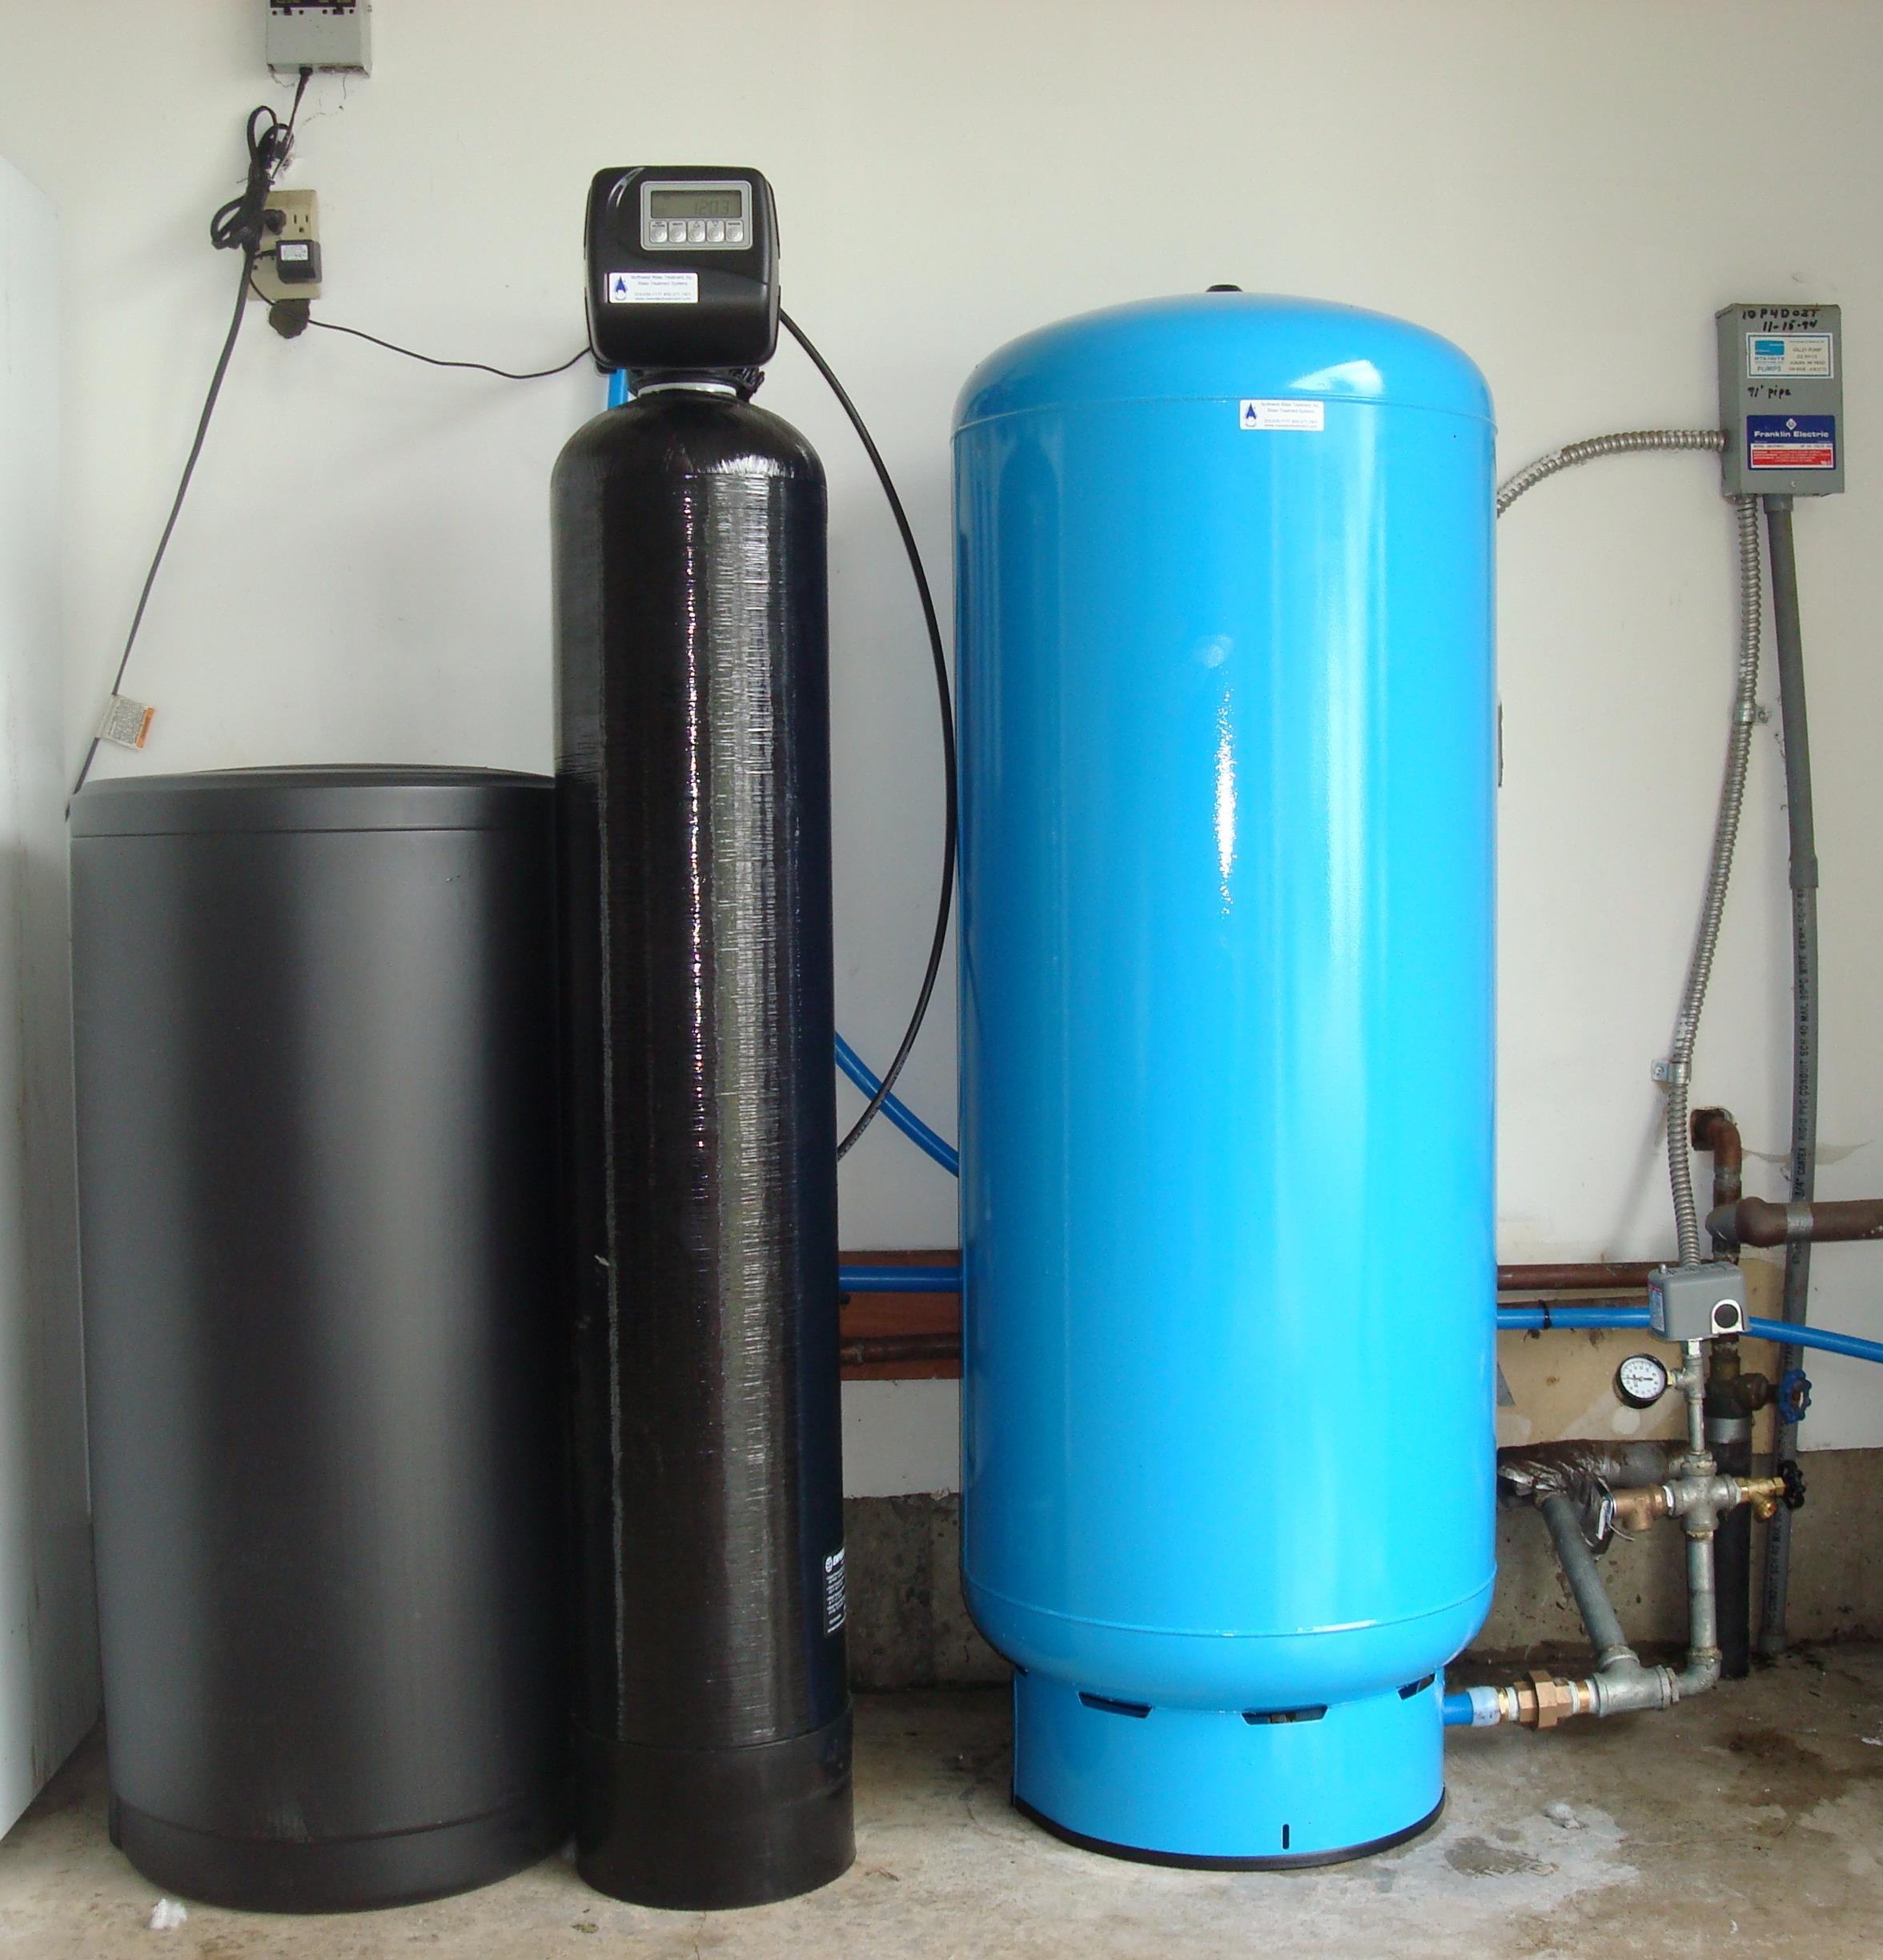 Home water softening system.